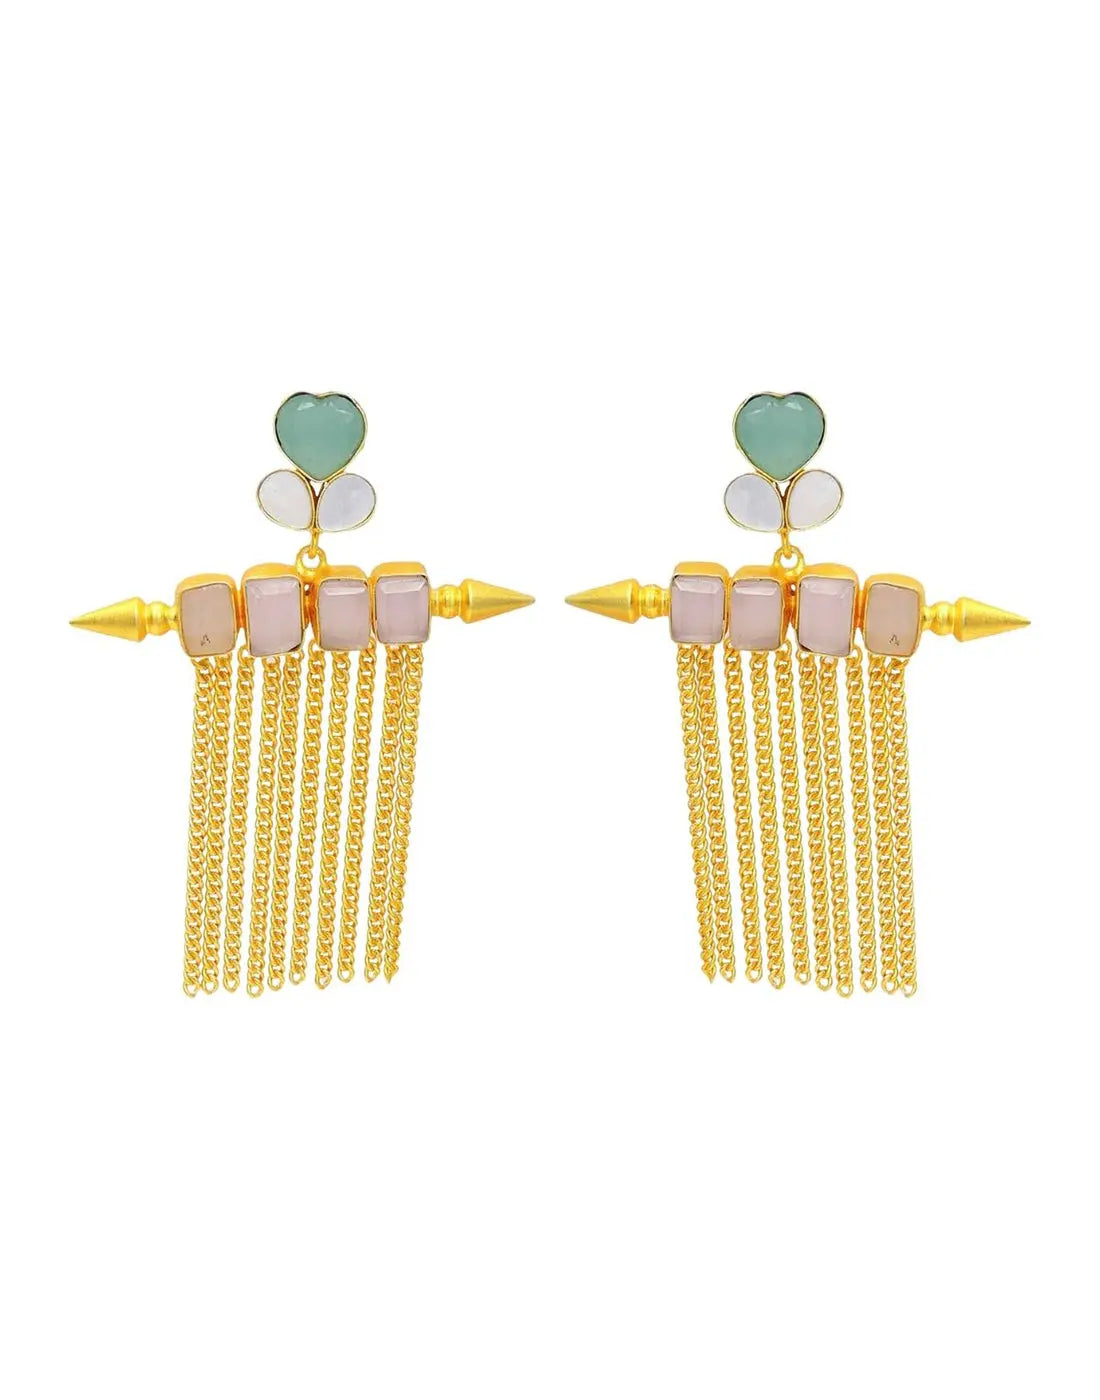 Roza Earrings- Handcrafted Jewellery from Dori